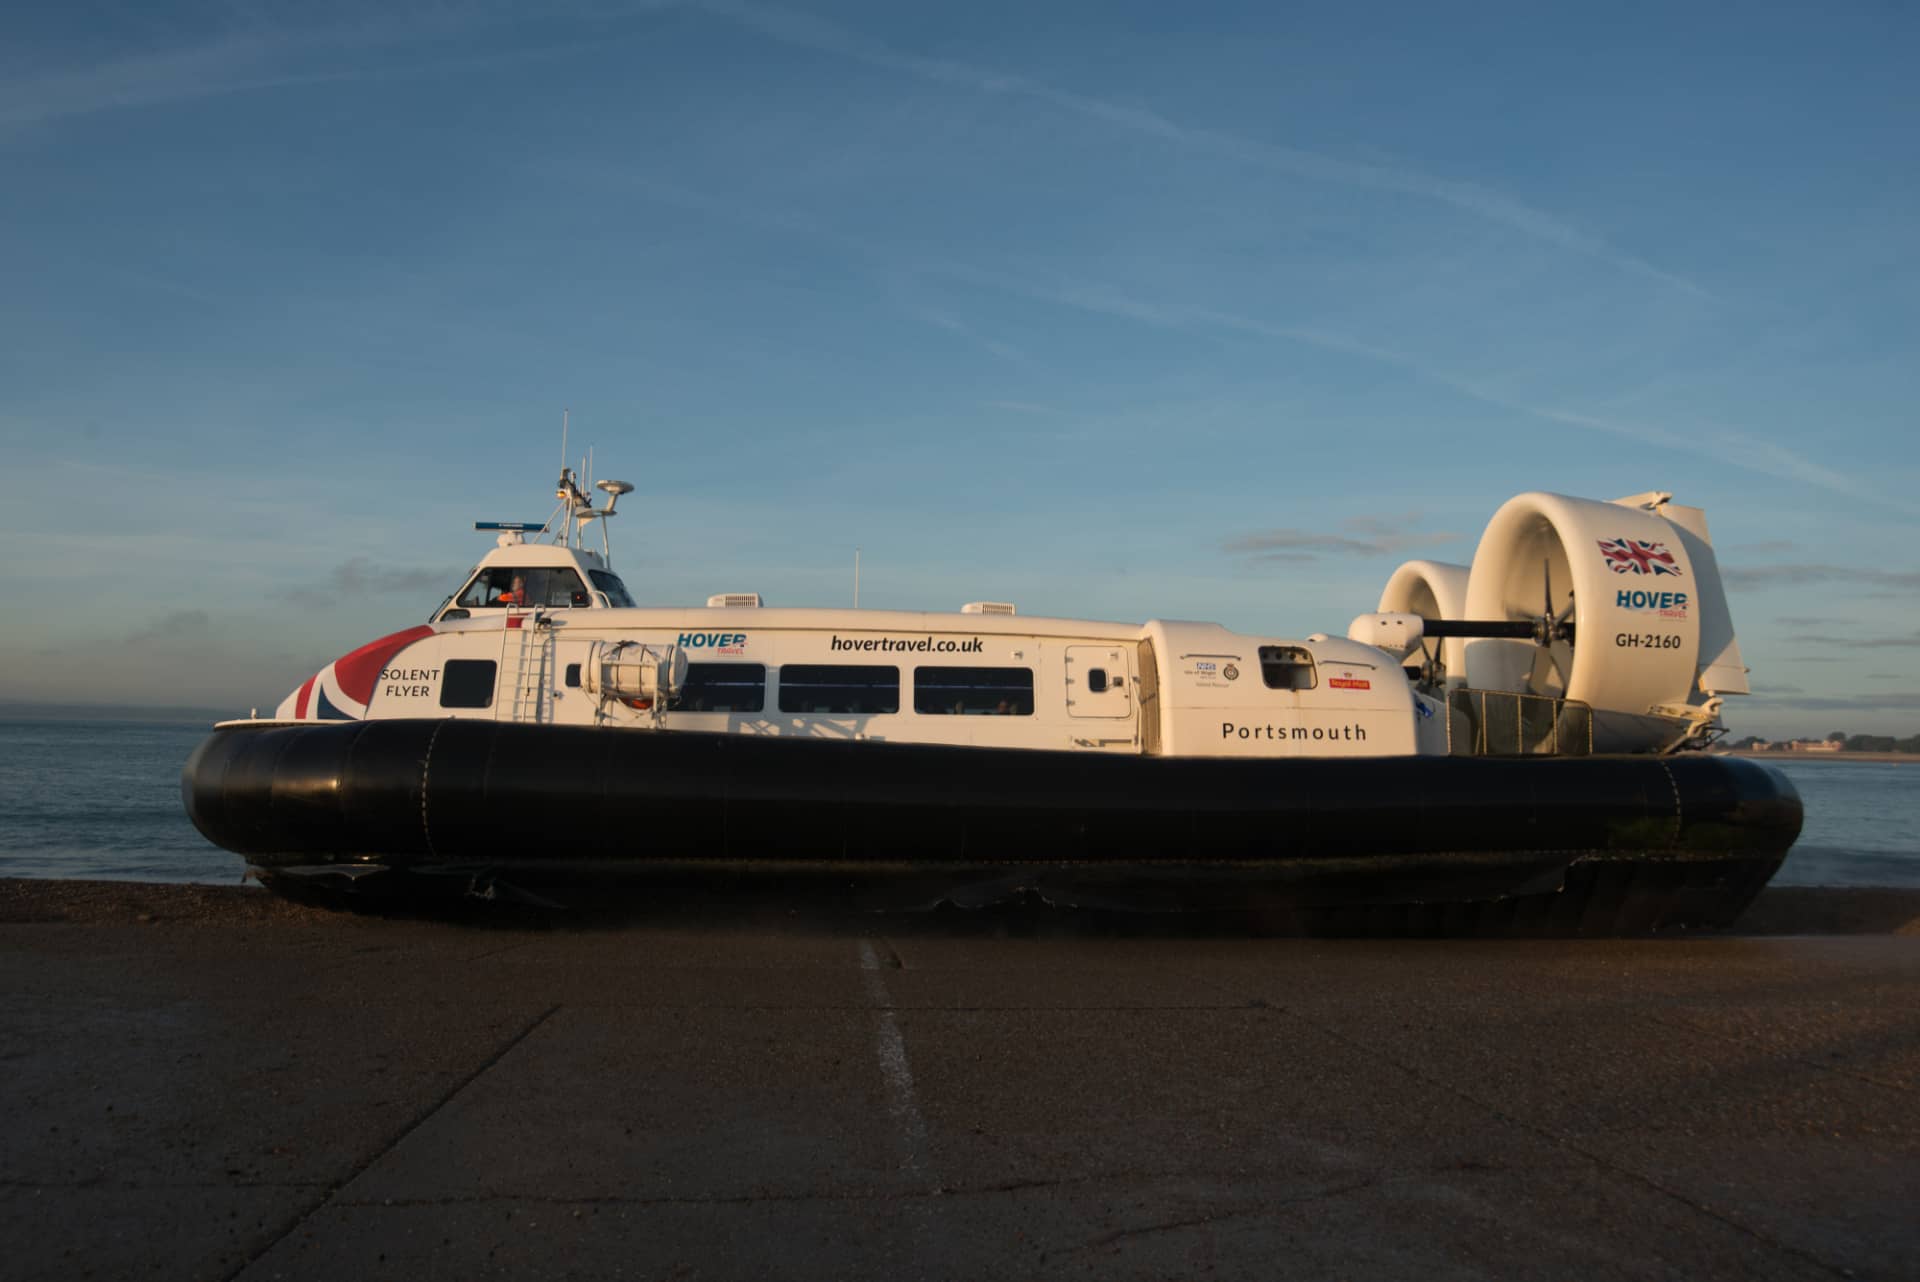 Hovertravel at the terminal